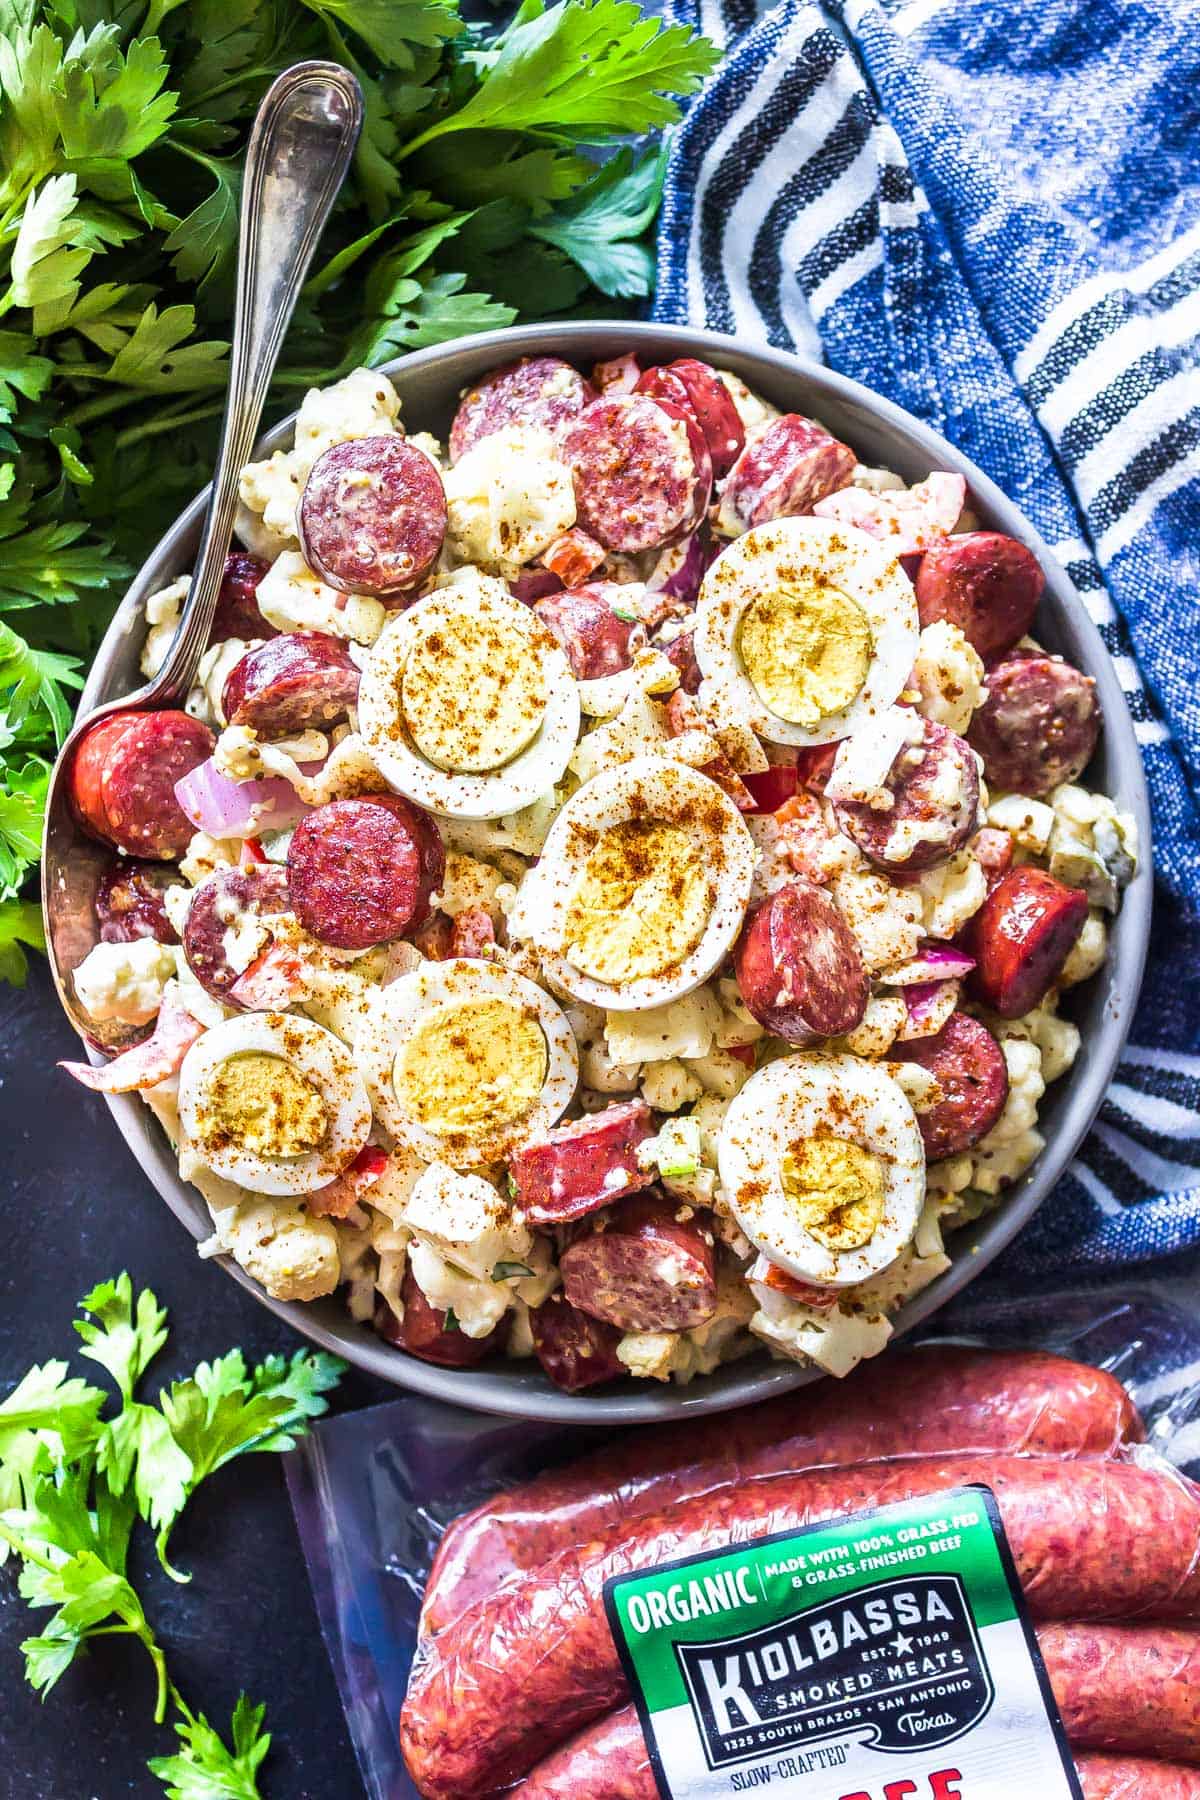 Keto "Potato" Salad with Smoked Sausage In a large serving bowl with kiolbassa packaging in the foreground.